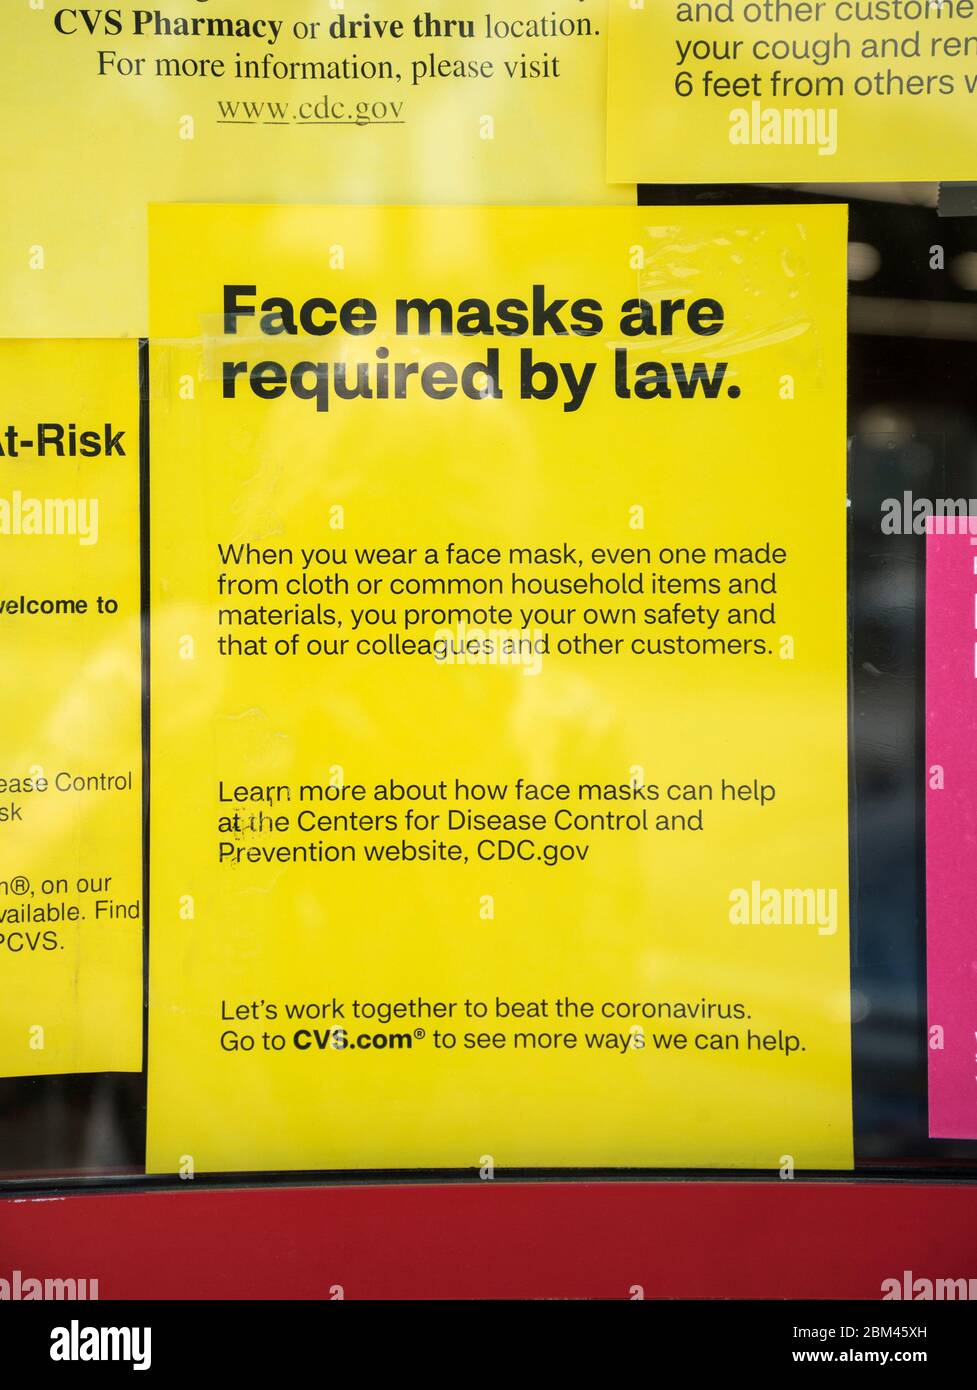 Mandated Face masks required by law in Alachua County, Florida by everyone who enters due to Covid 19 pandemic...Sign on pharmacy door entrance. Stock Photo